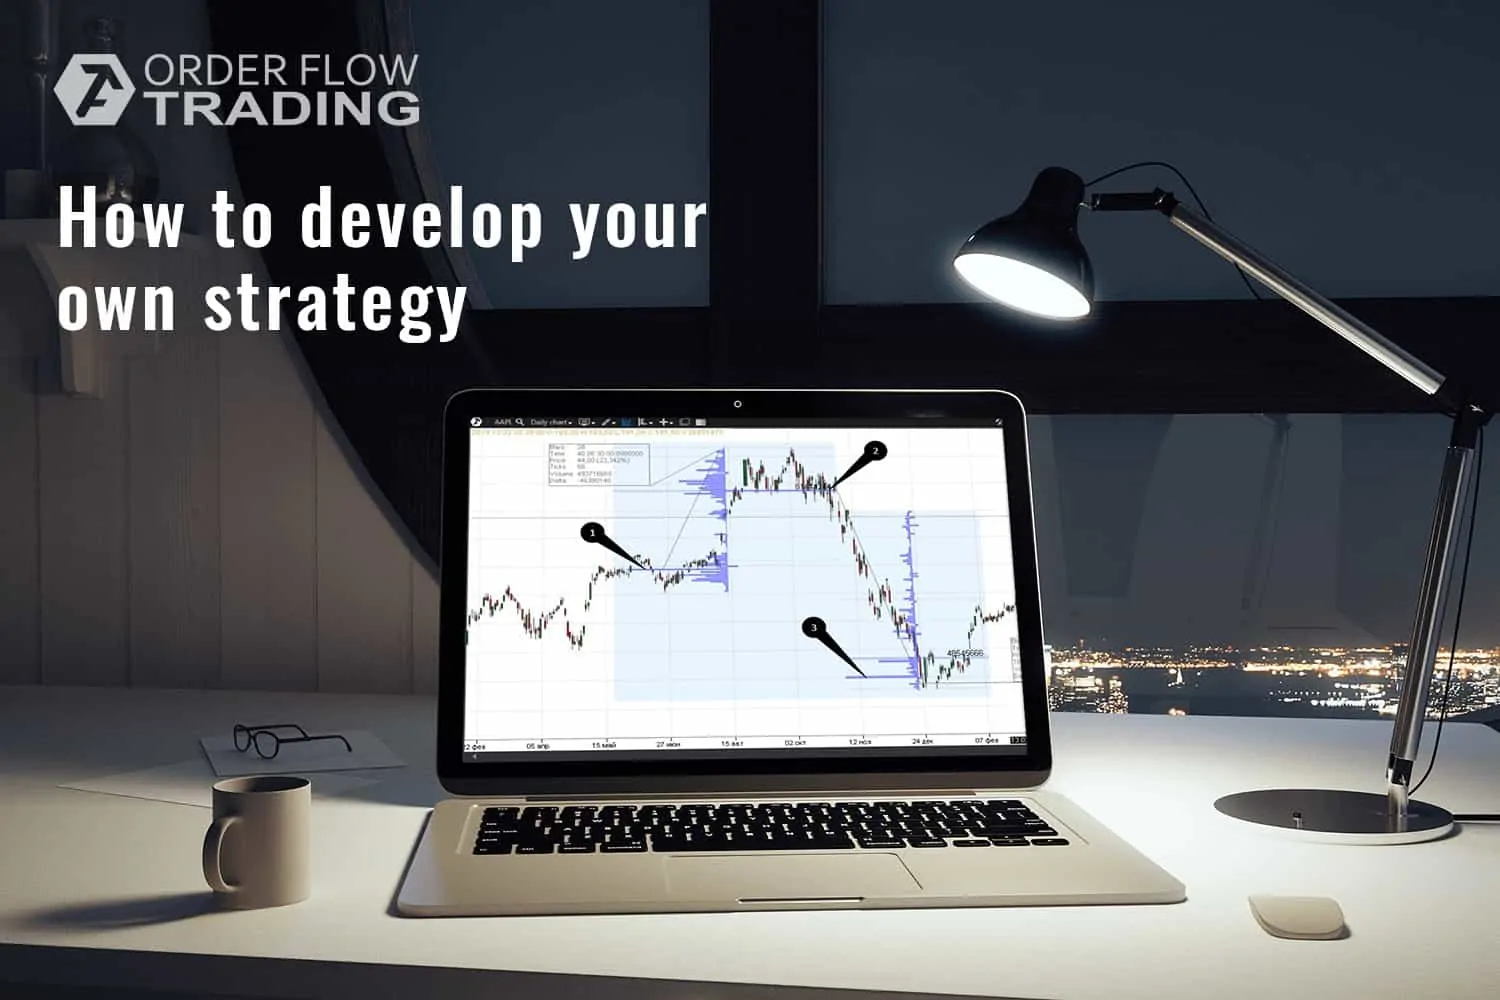 What a trading strategy is. How to develop your own strategy.